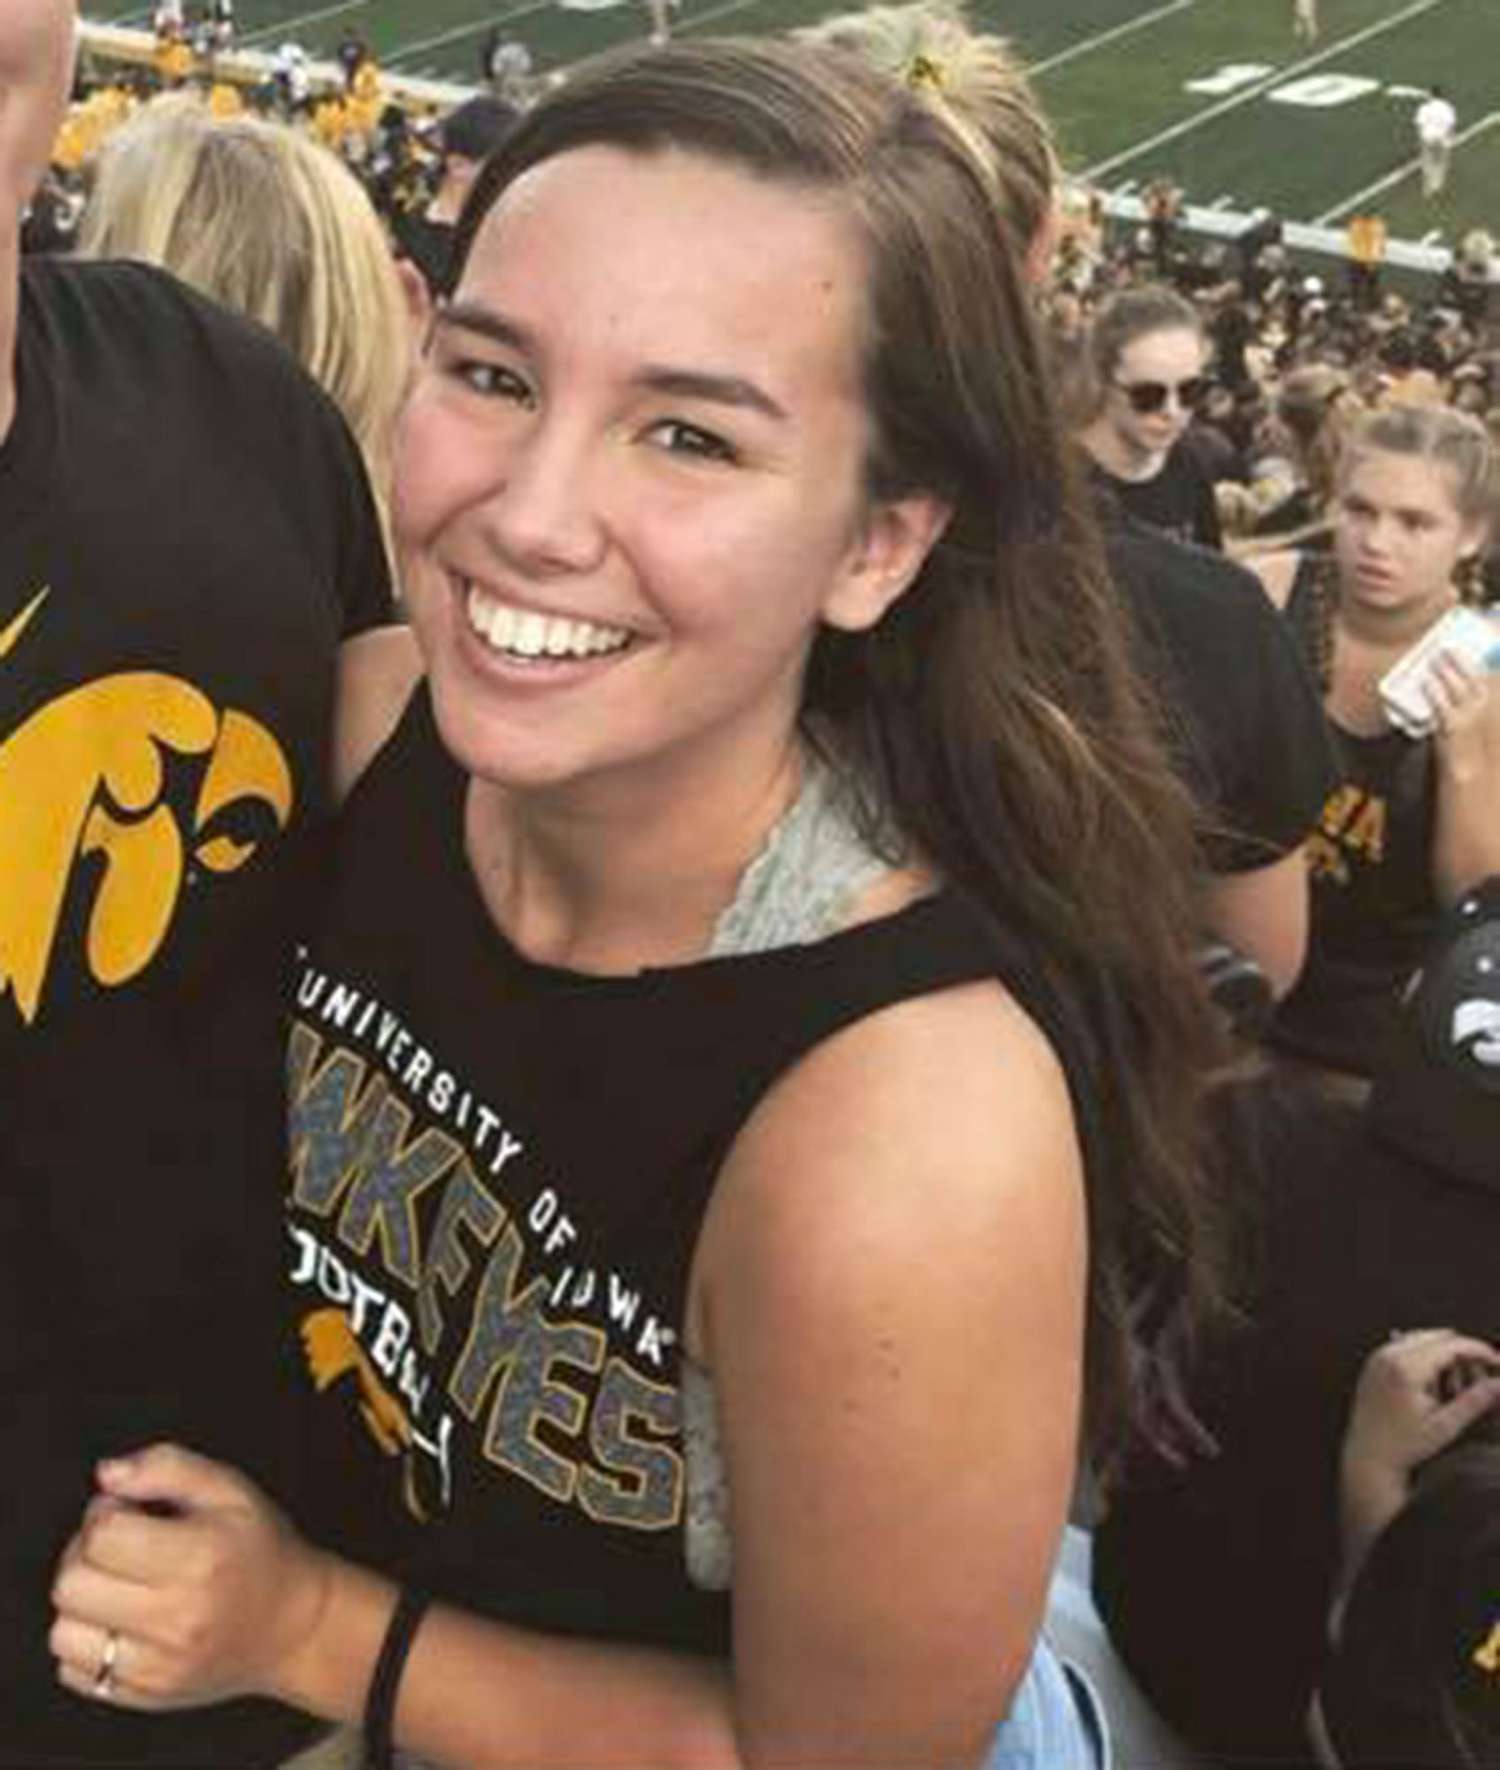 Mollie Tibbetts' Dad Urges Captor to Release Missing Daughter | PEOPLE.com